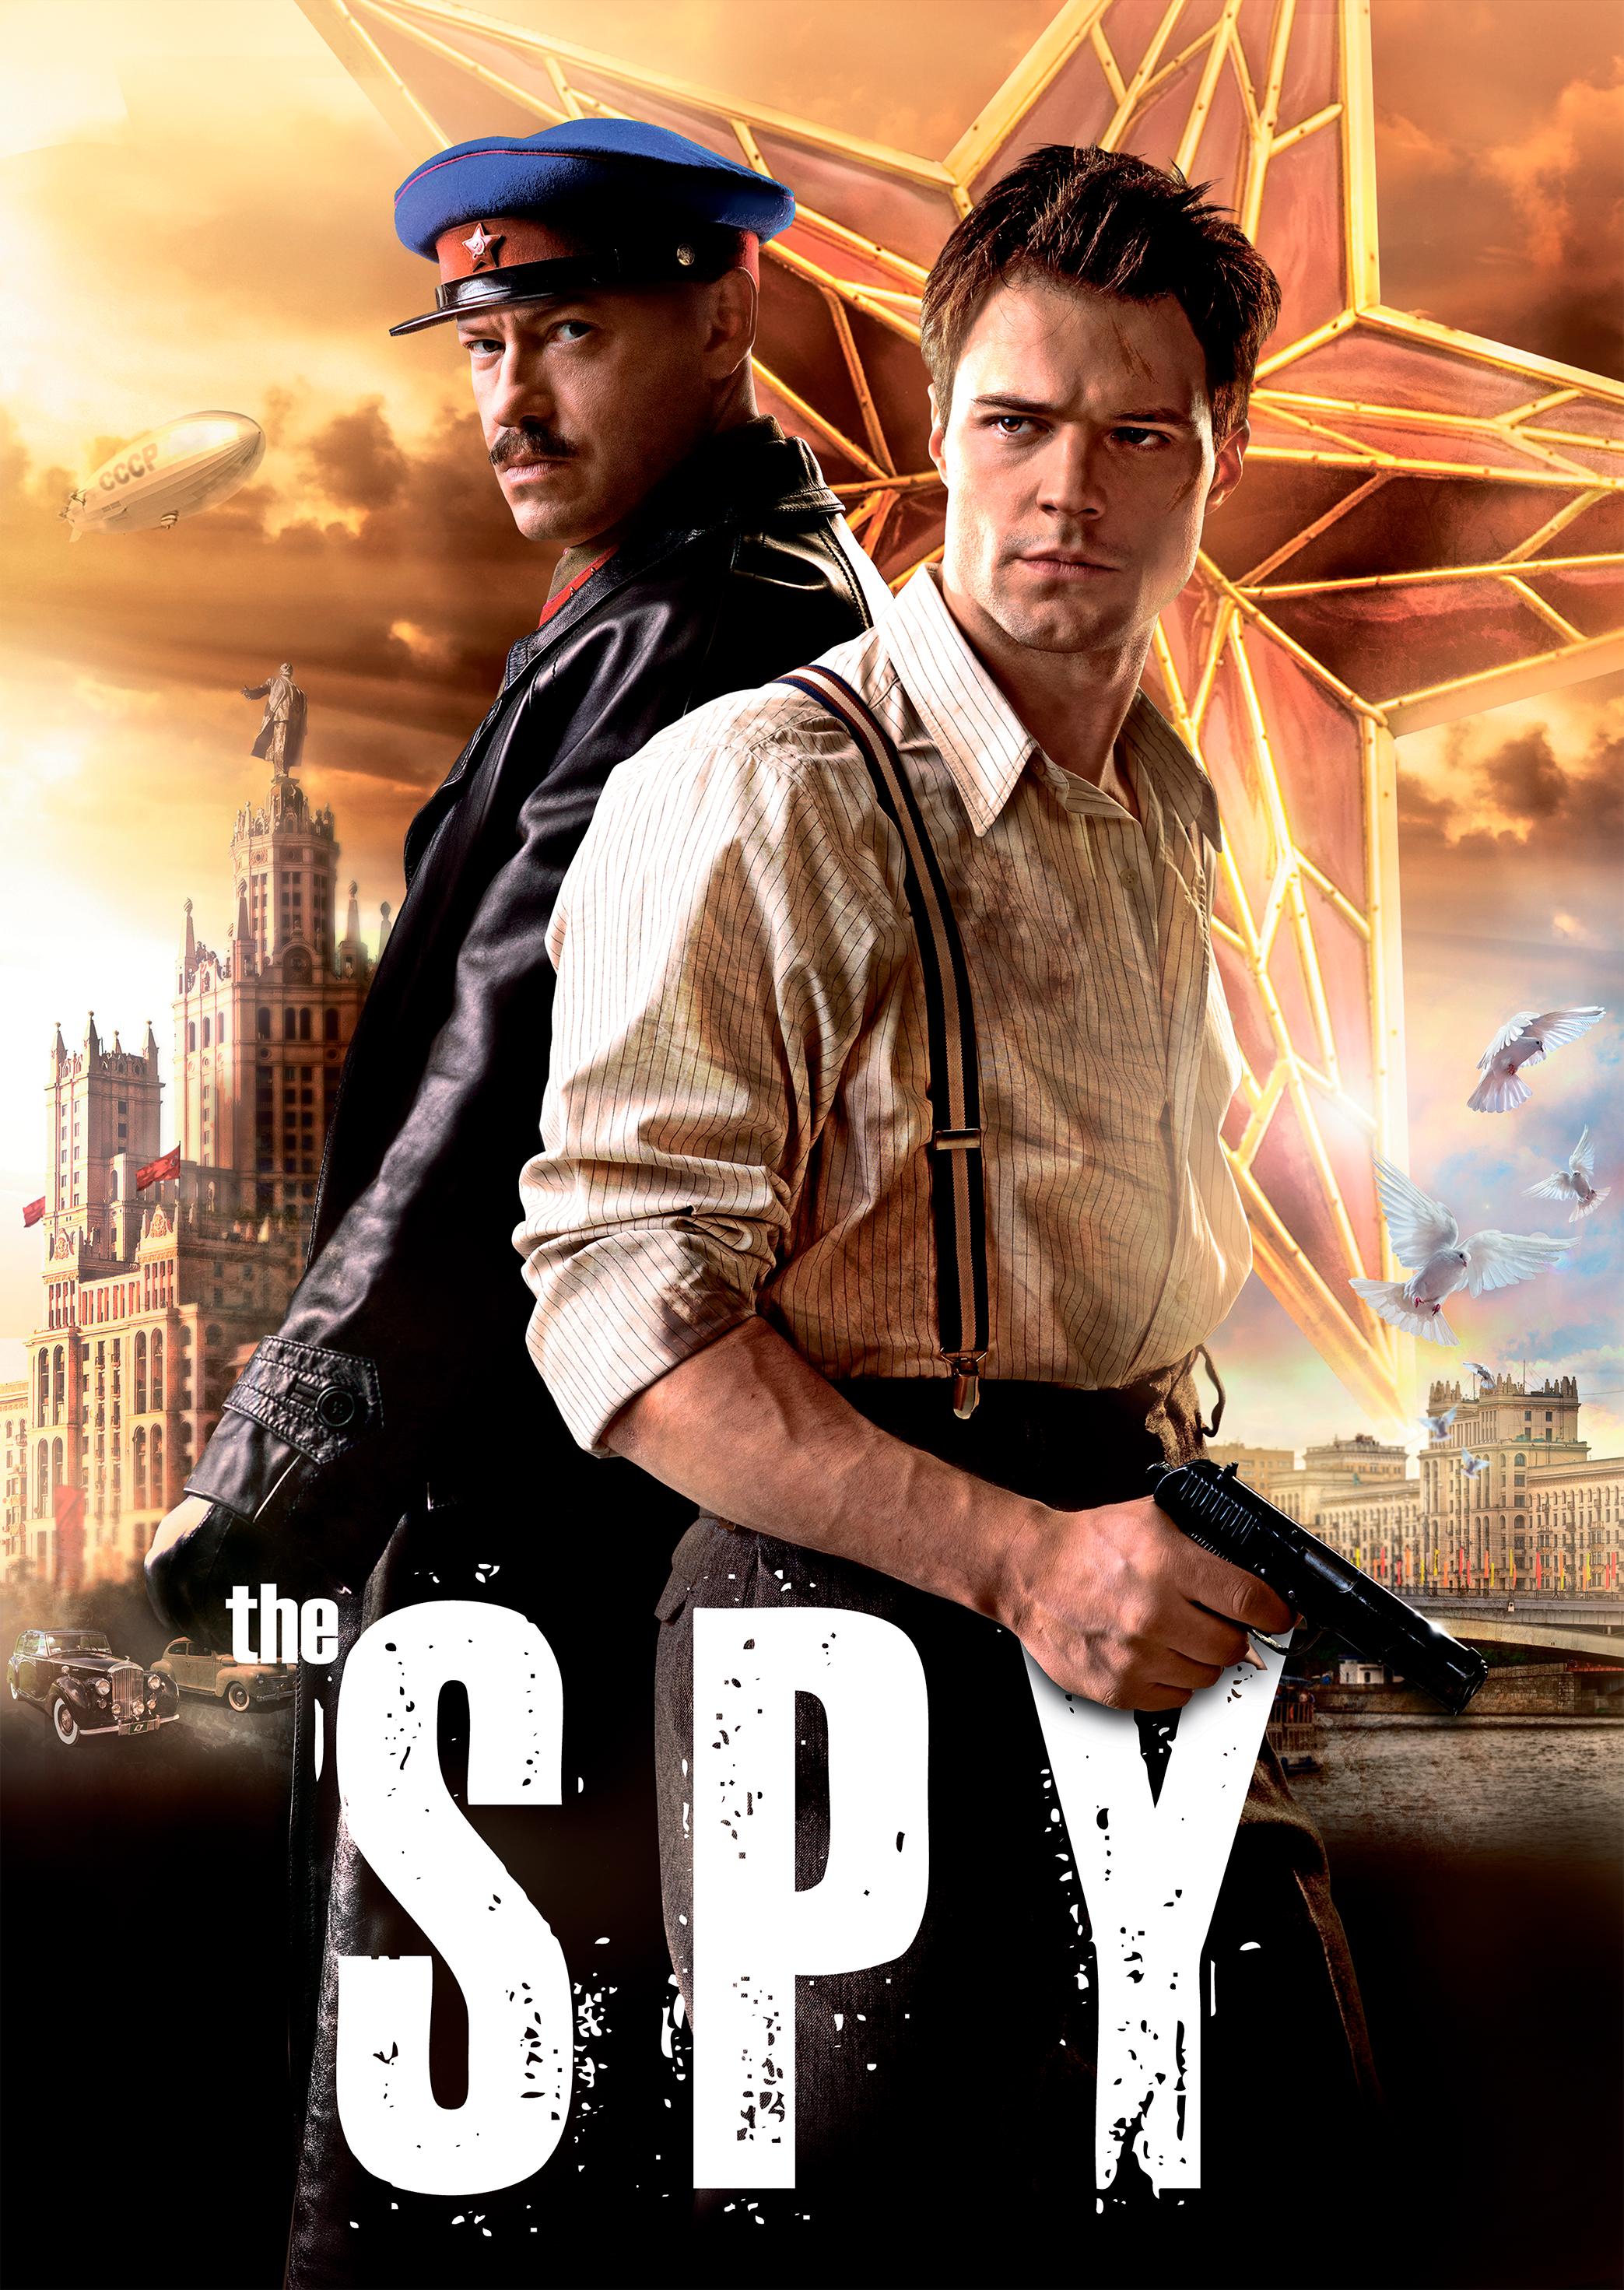 THAILAND TV VIEWERS WILL SEE "THE SPY"